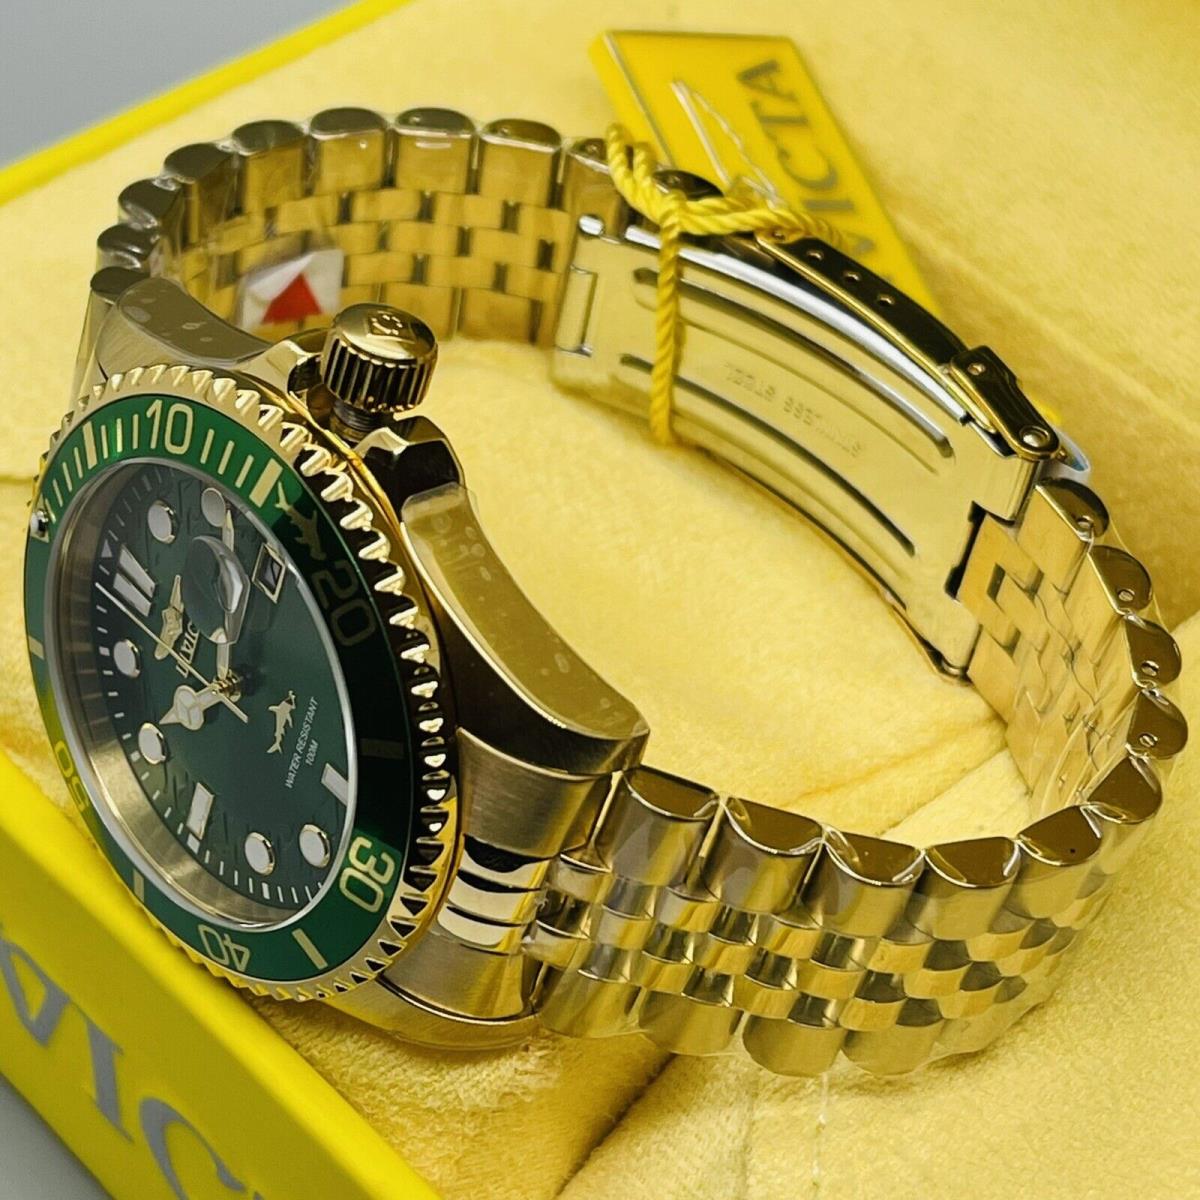 Invicta watch Pro Diver - Green Dial, Gold Band, Gold Bezel